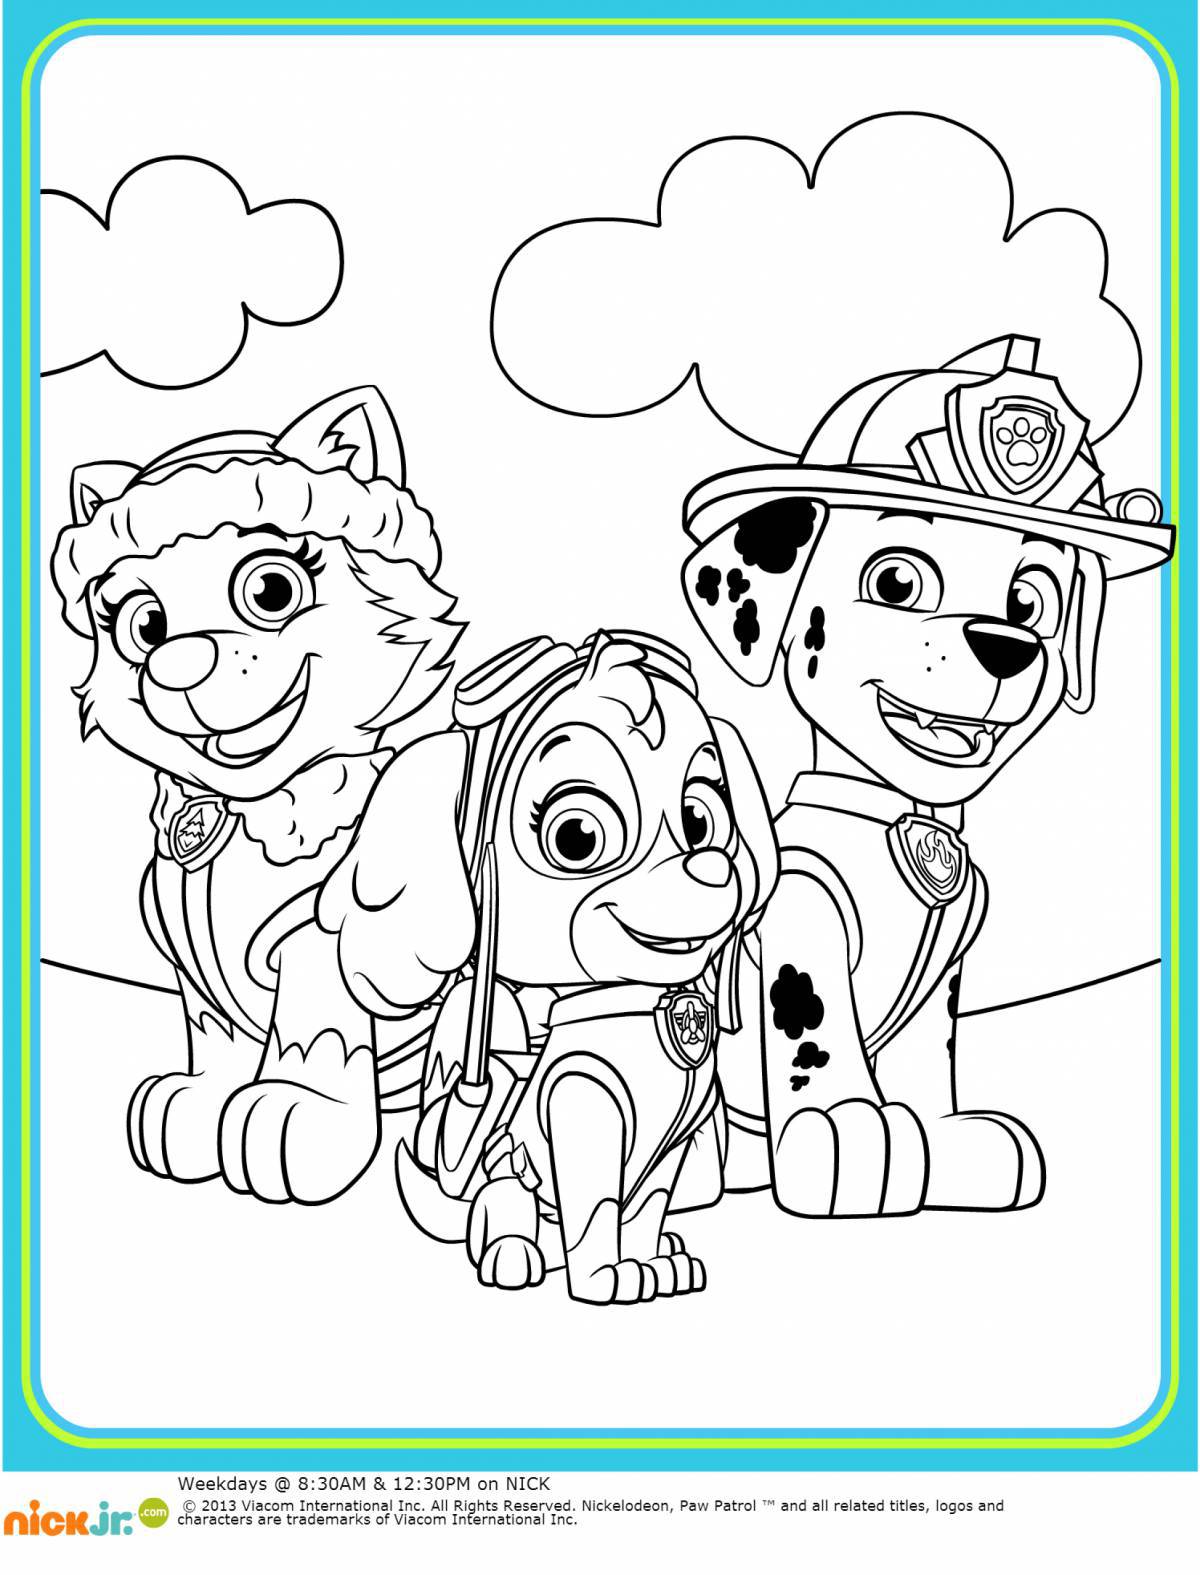 Funny Everest Paw Patrol coloring book